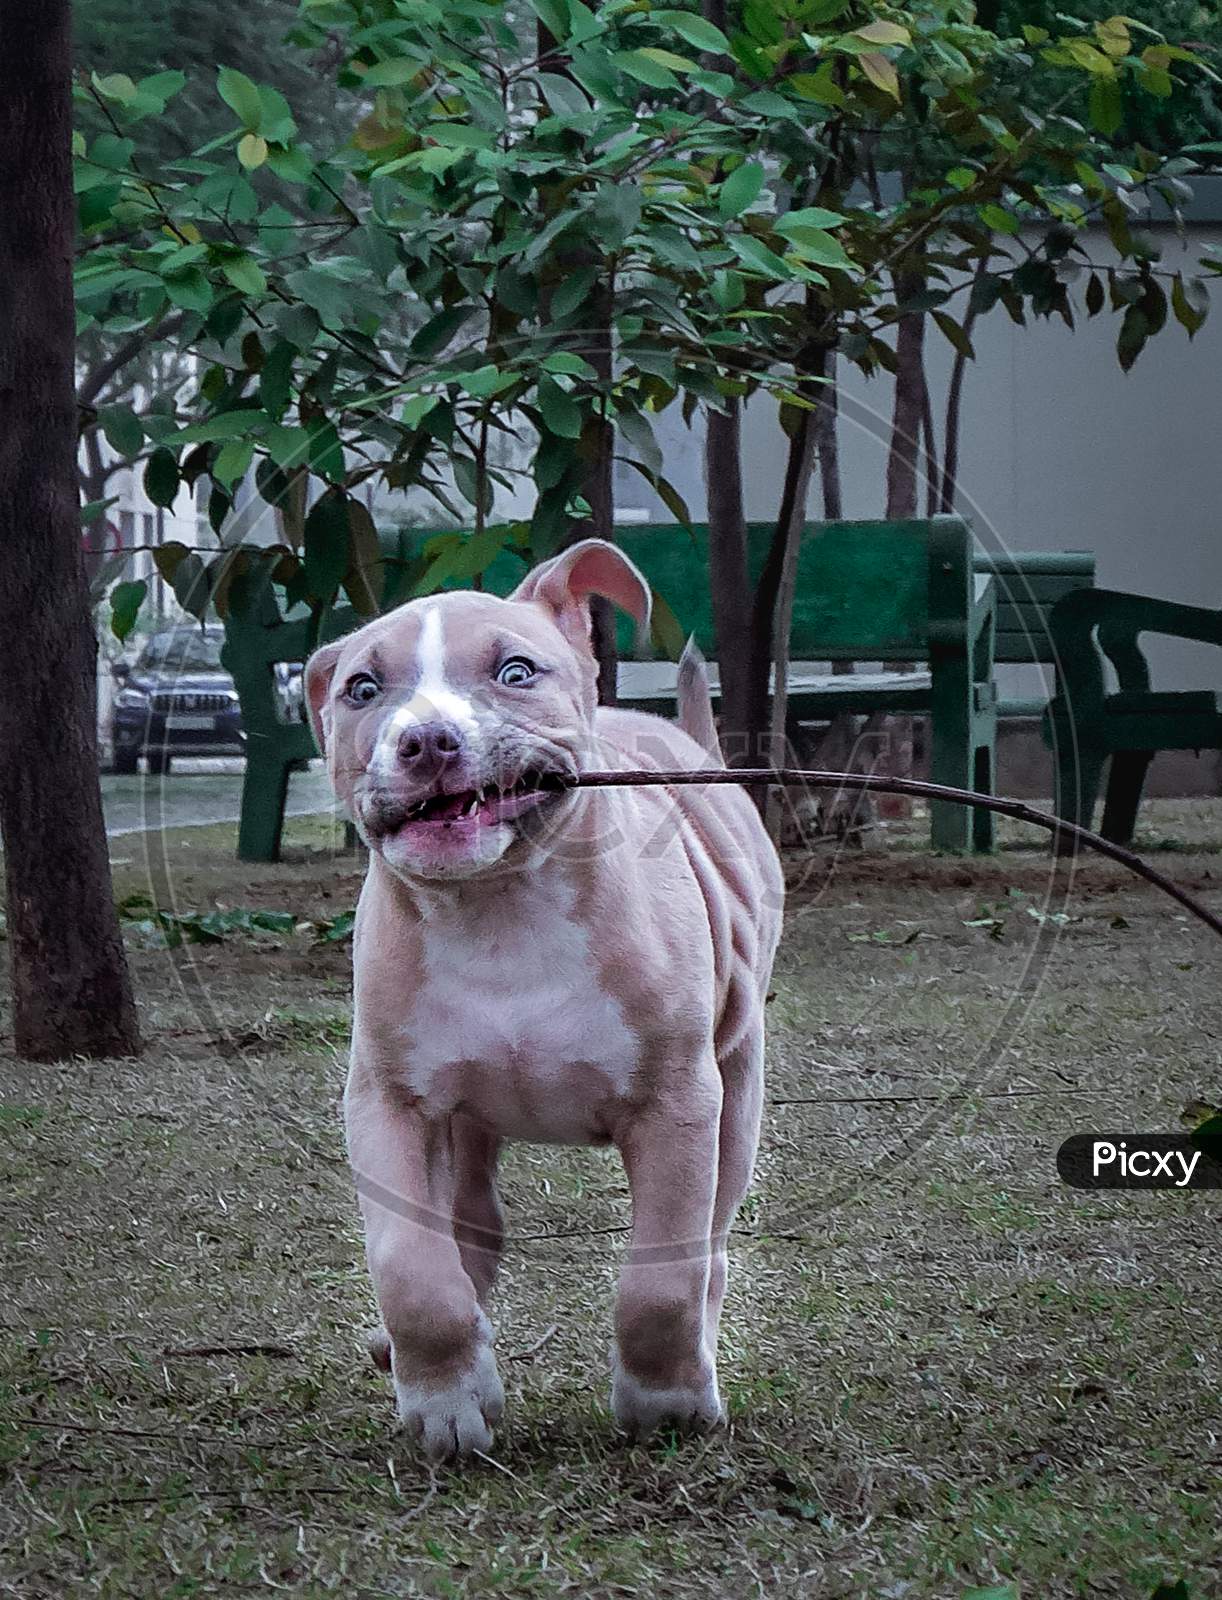 American bully puppy running with toy